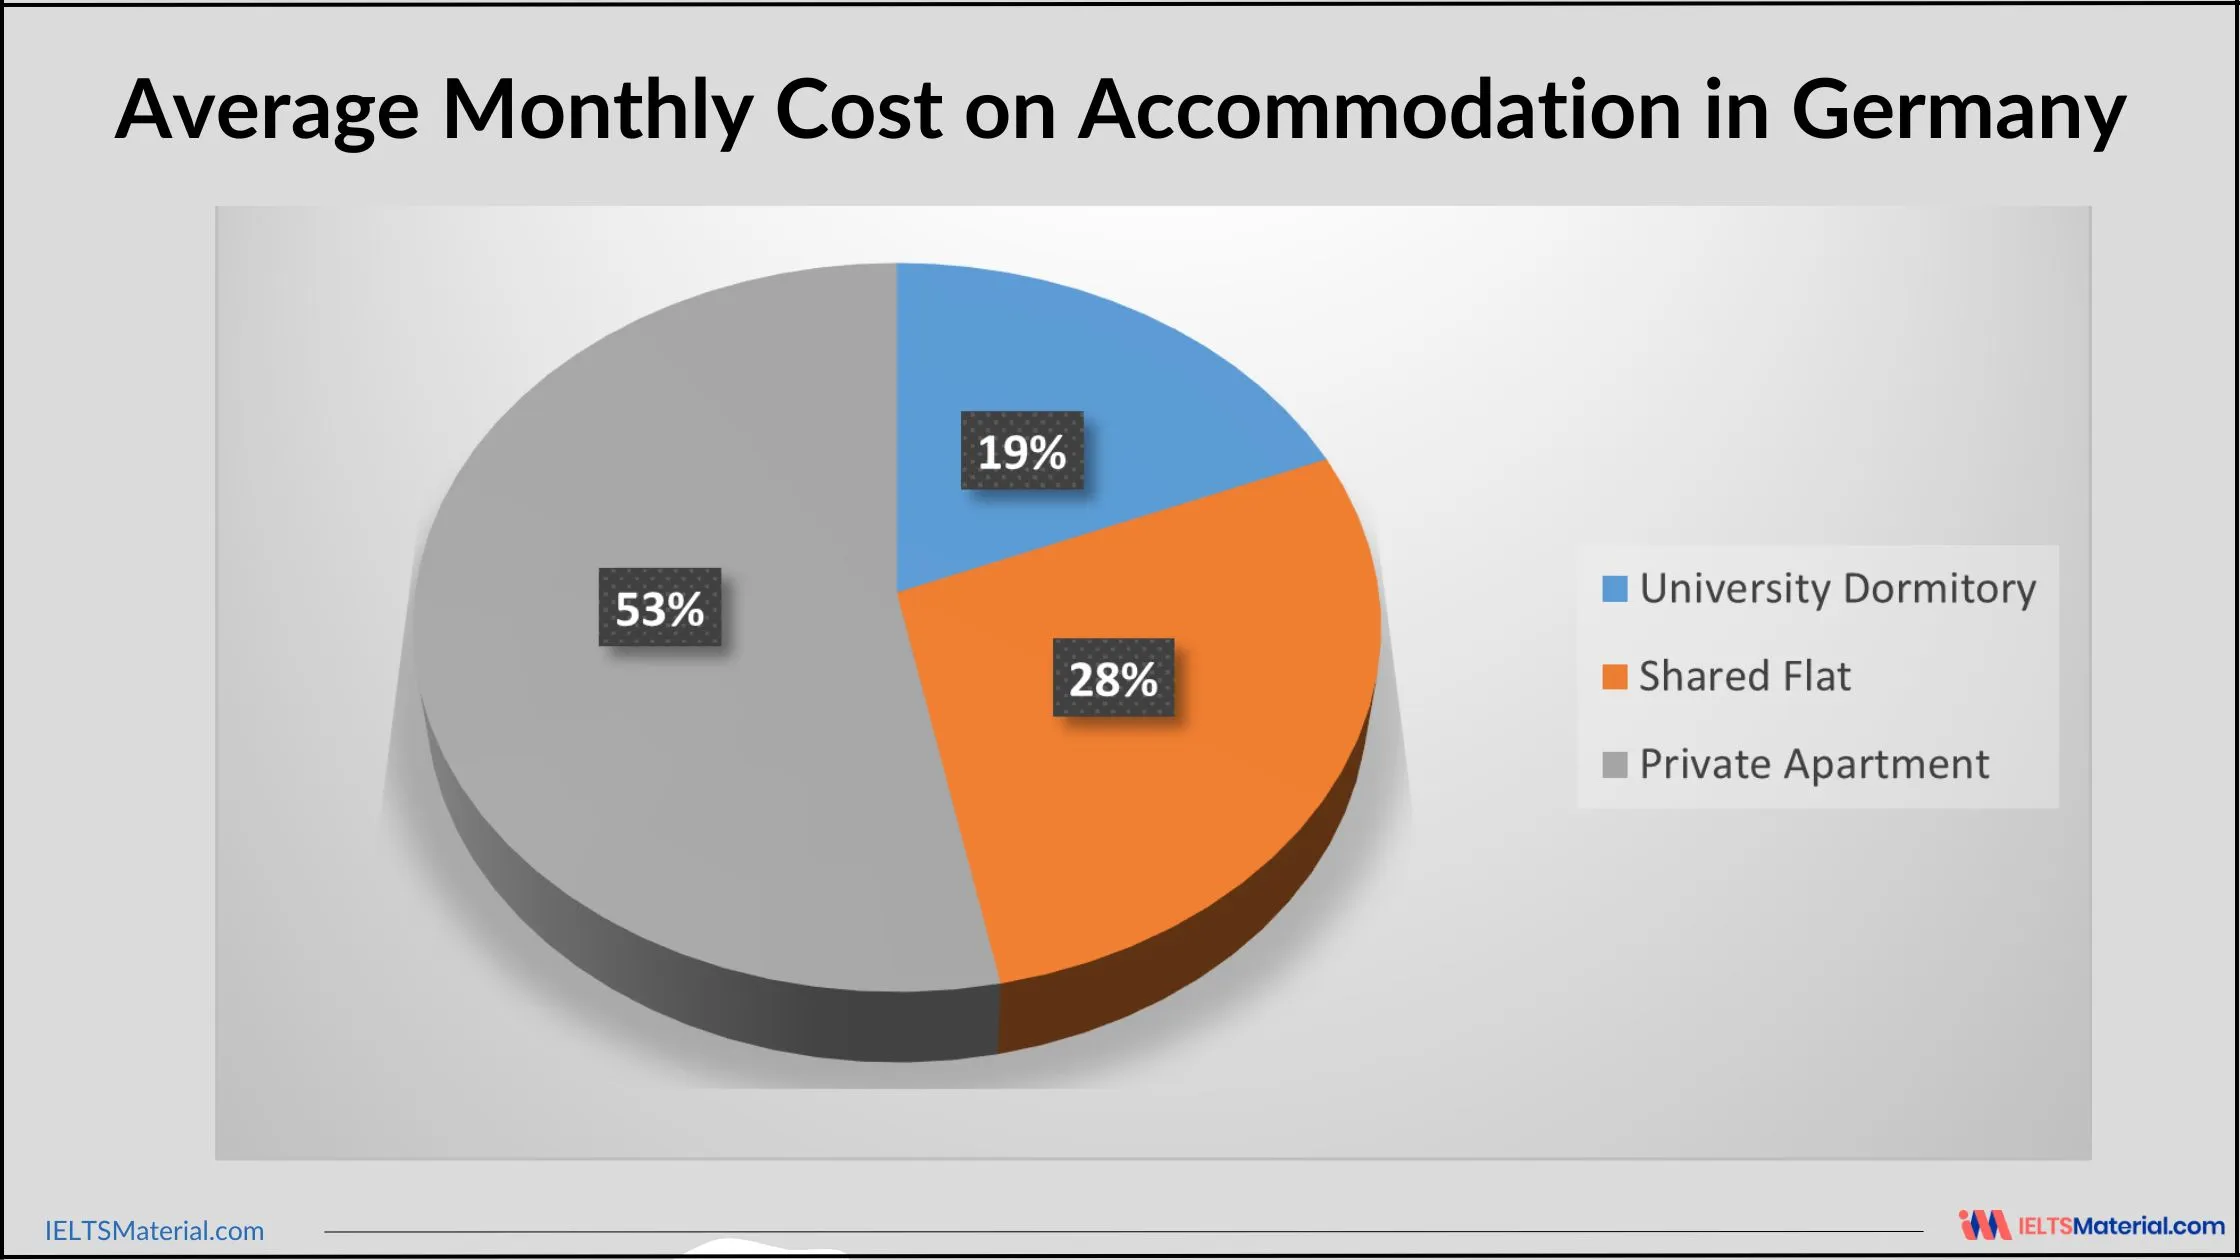 Average Monthly Cost on Accommodation in Germany